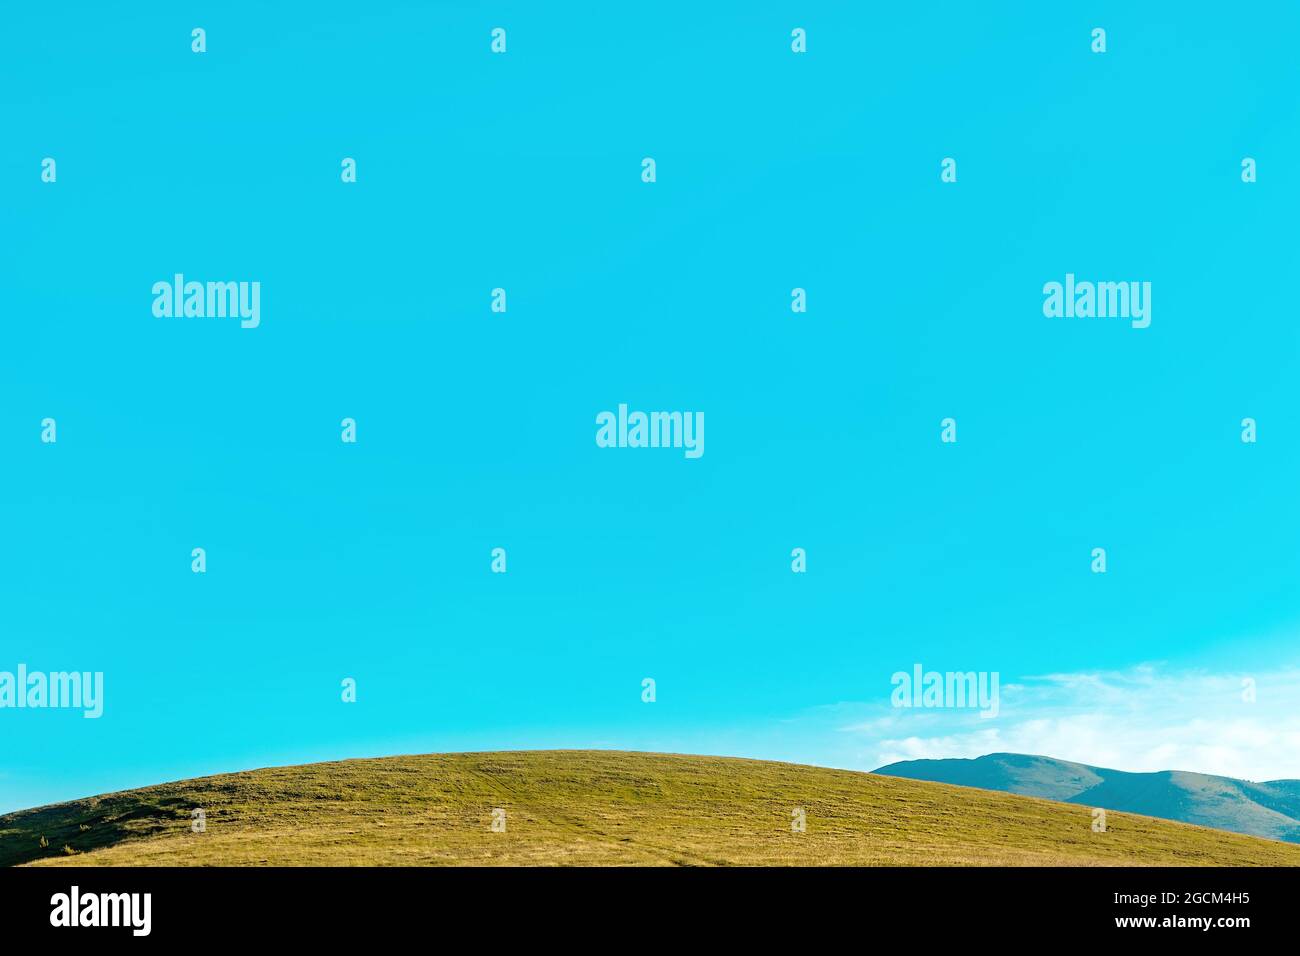 Minimal landscape composition, Zlatibor region in Serbia with sky as the copy space Stock Photo